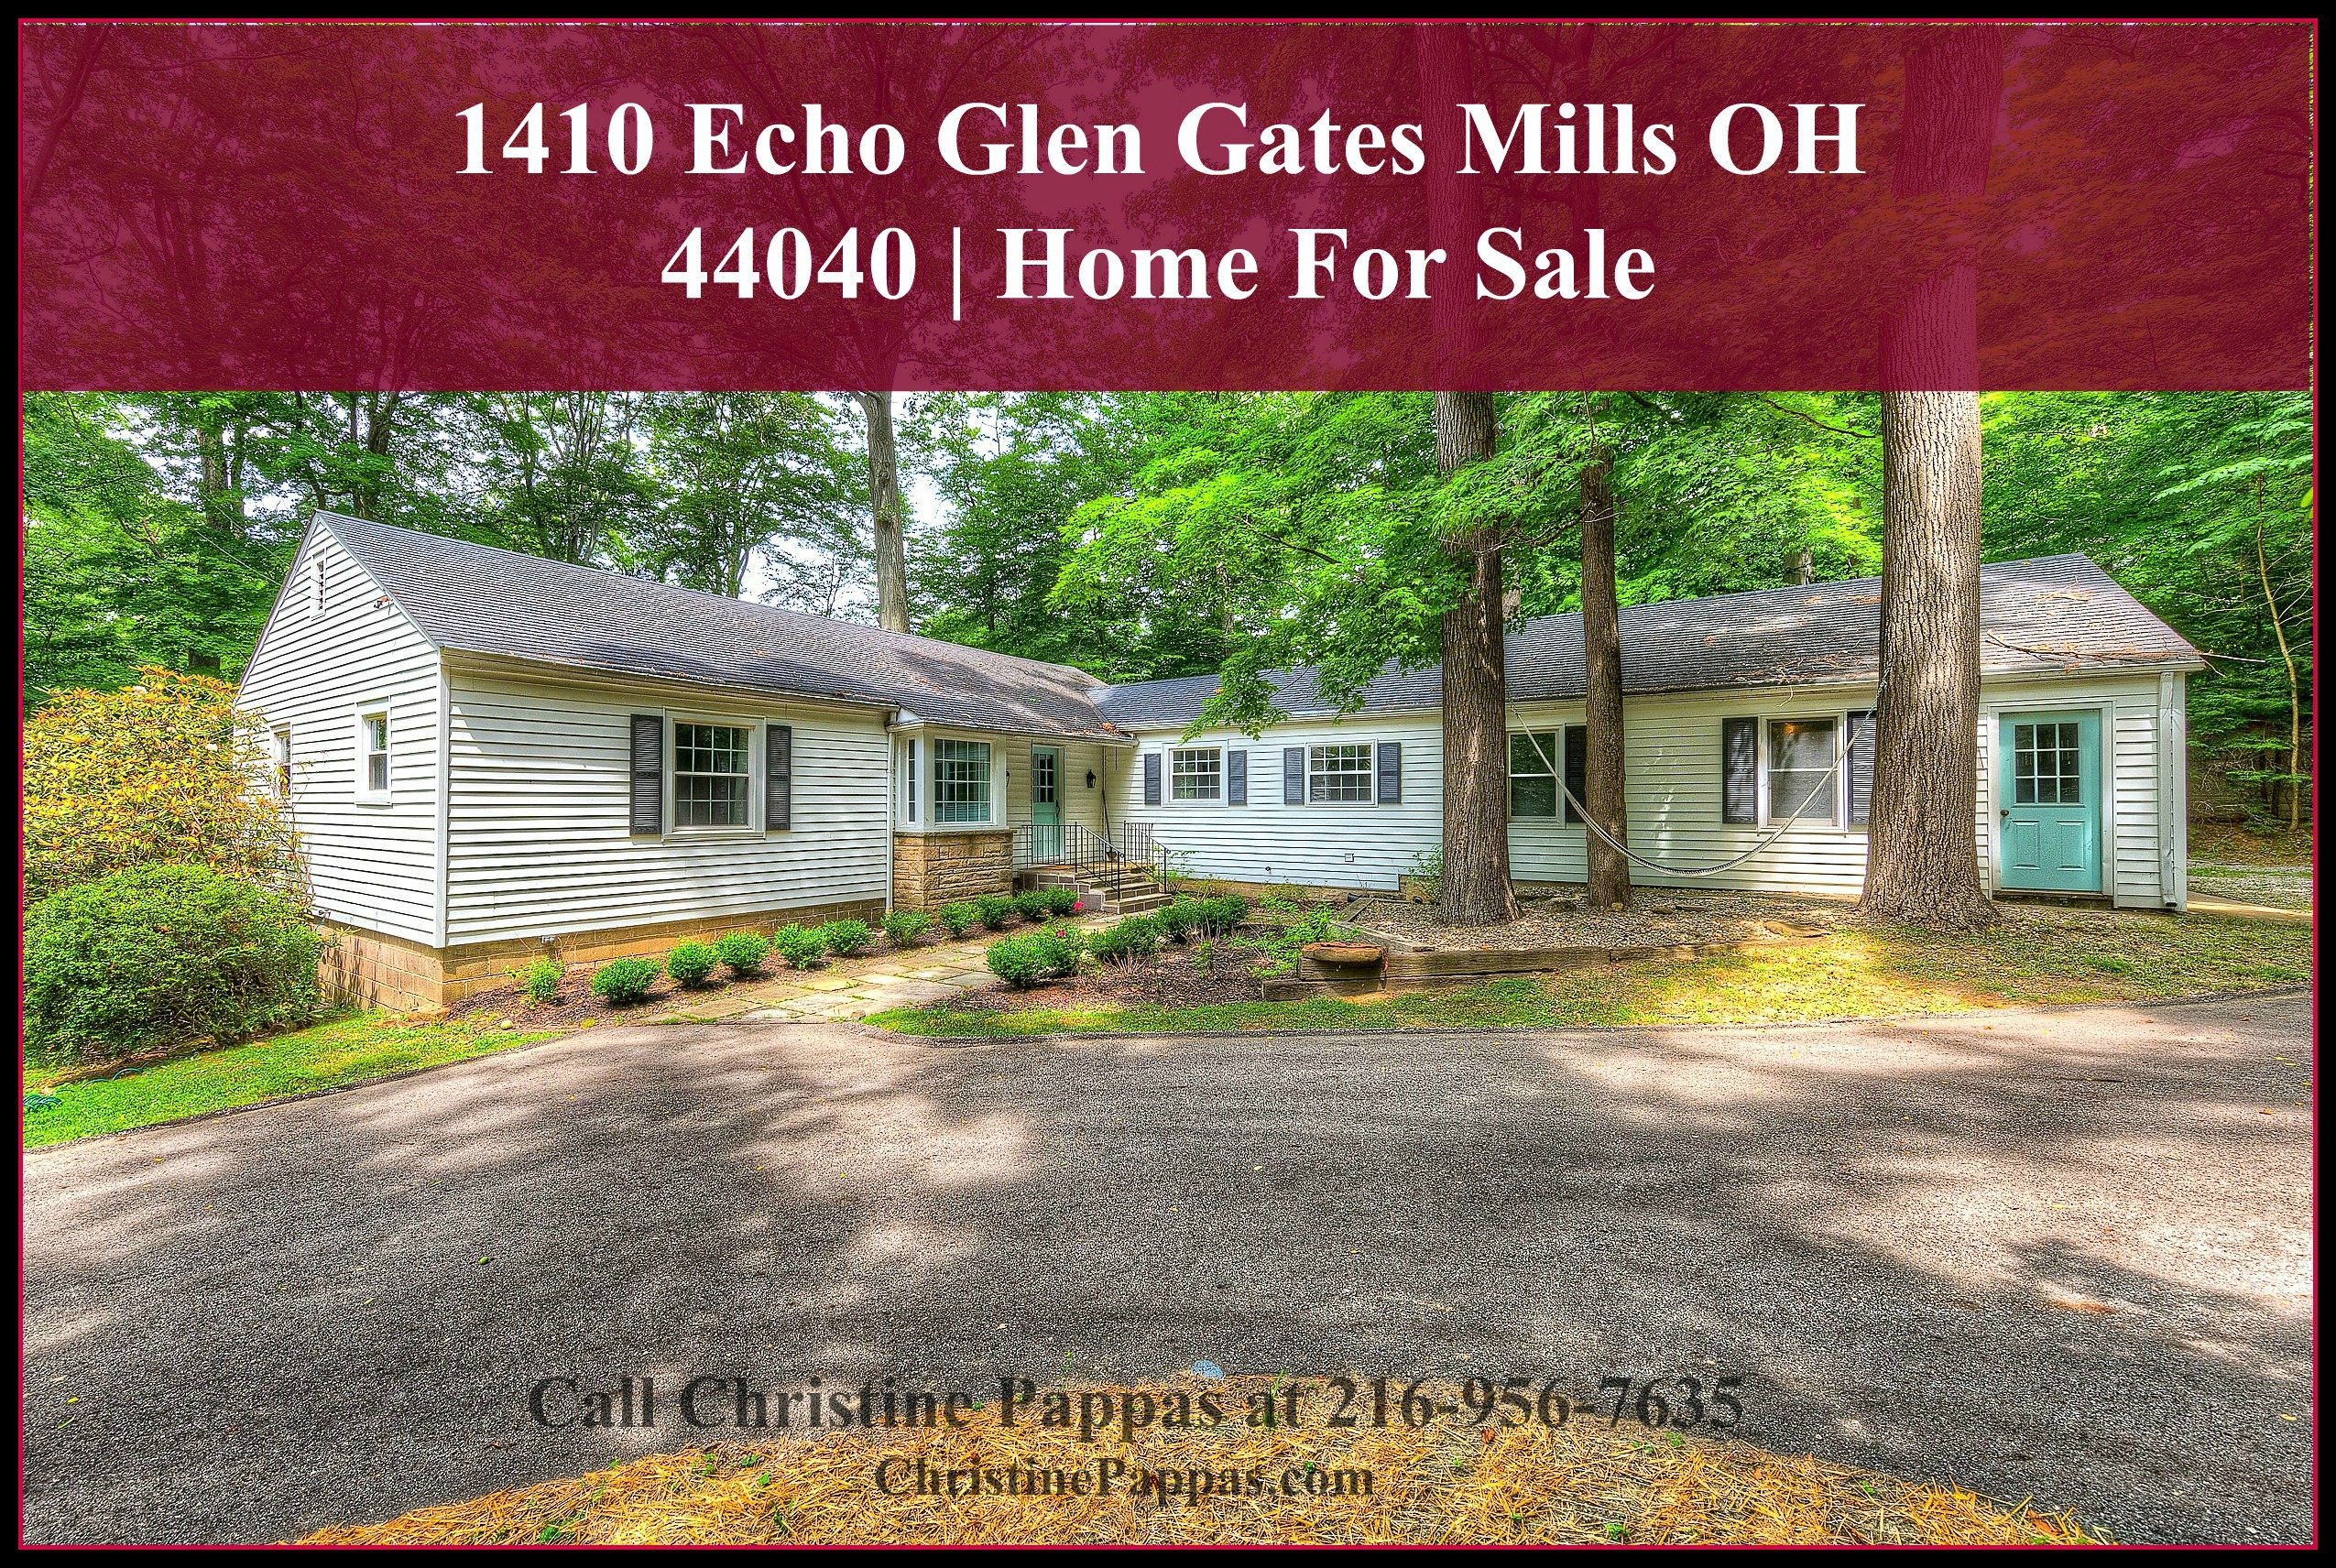 Home for Sale in Gates Mills Ohio